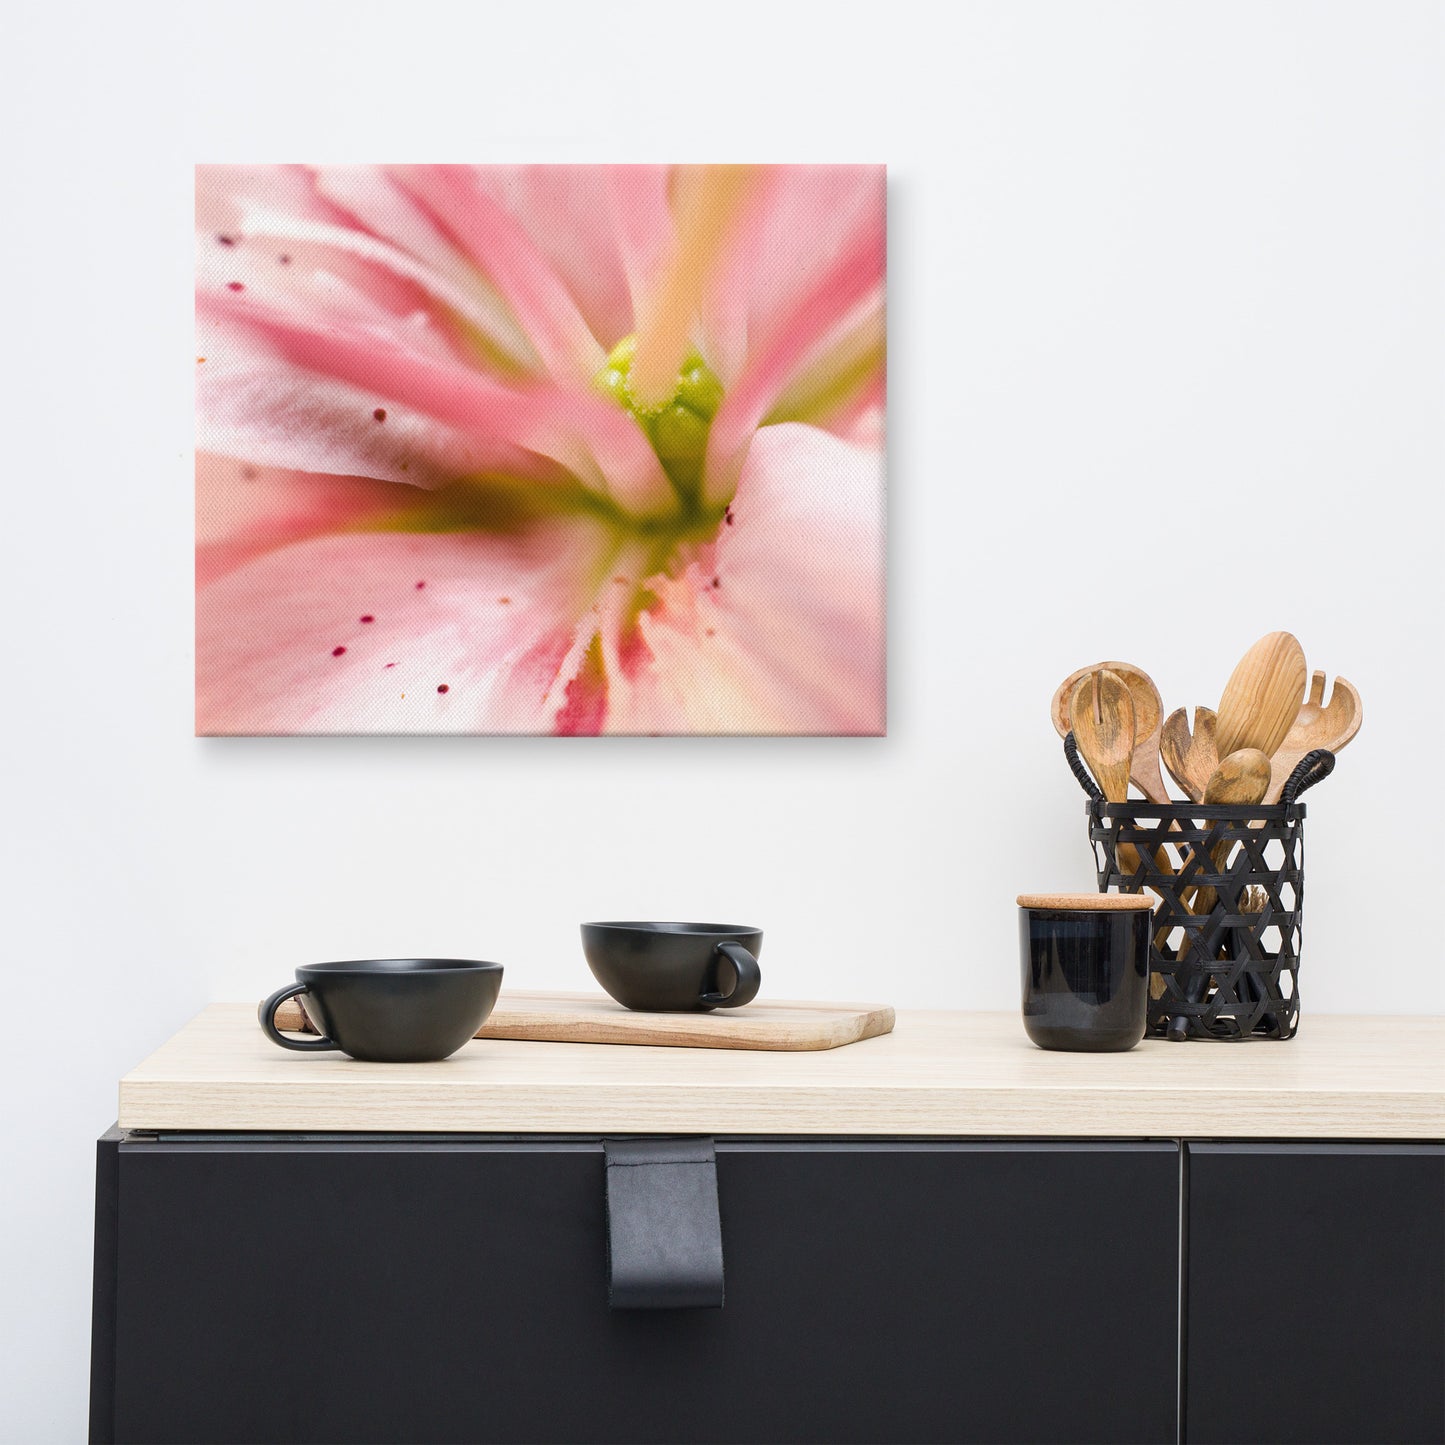 Center of the Stargazer Lily Floral Nature Canvas Wall Art Prints